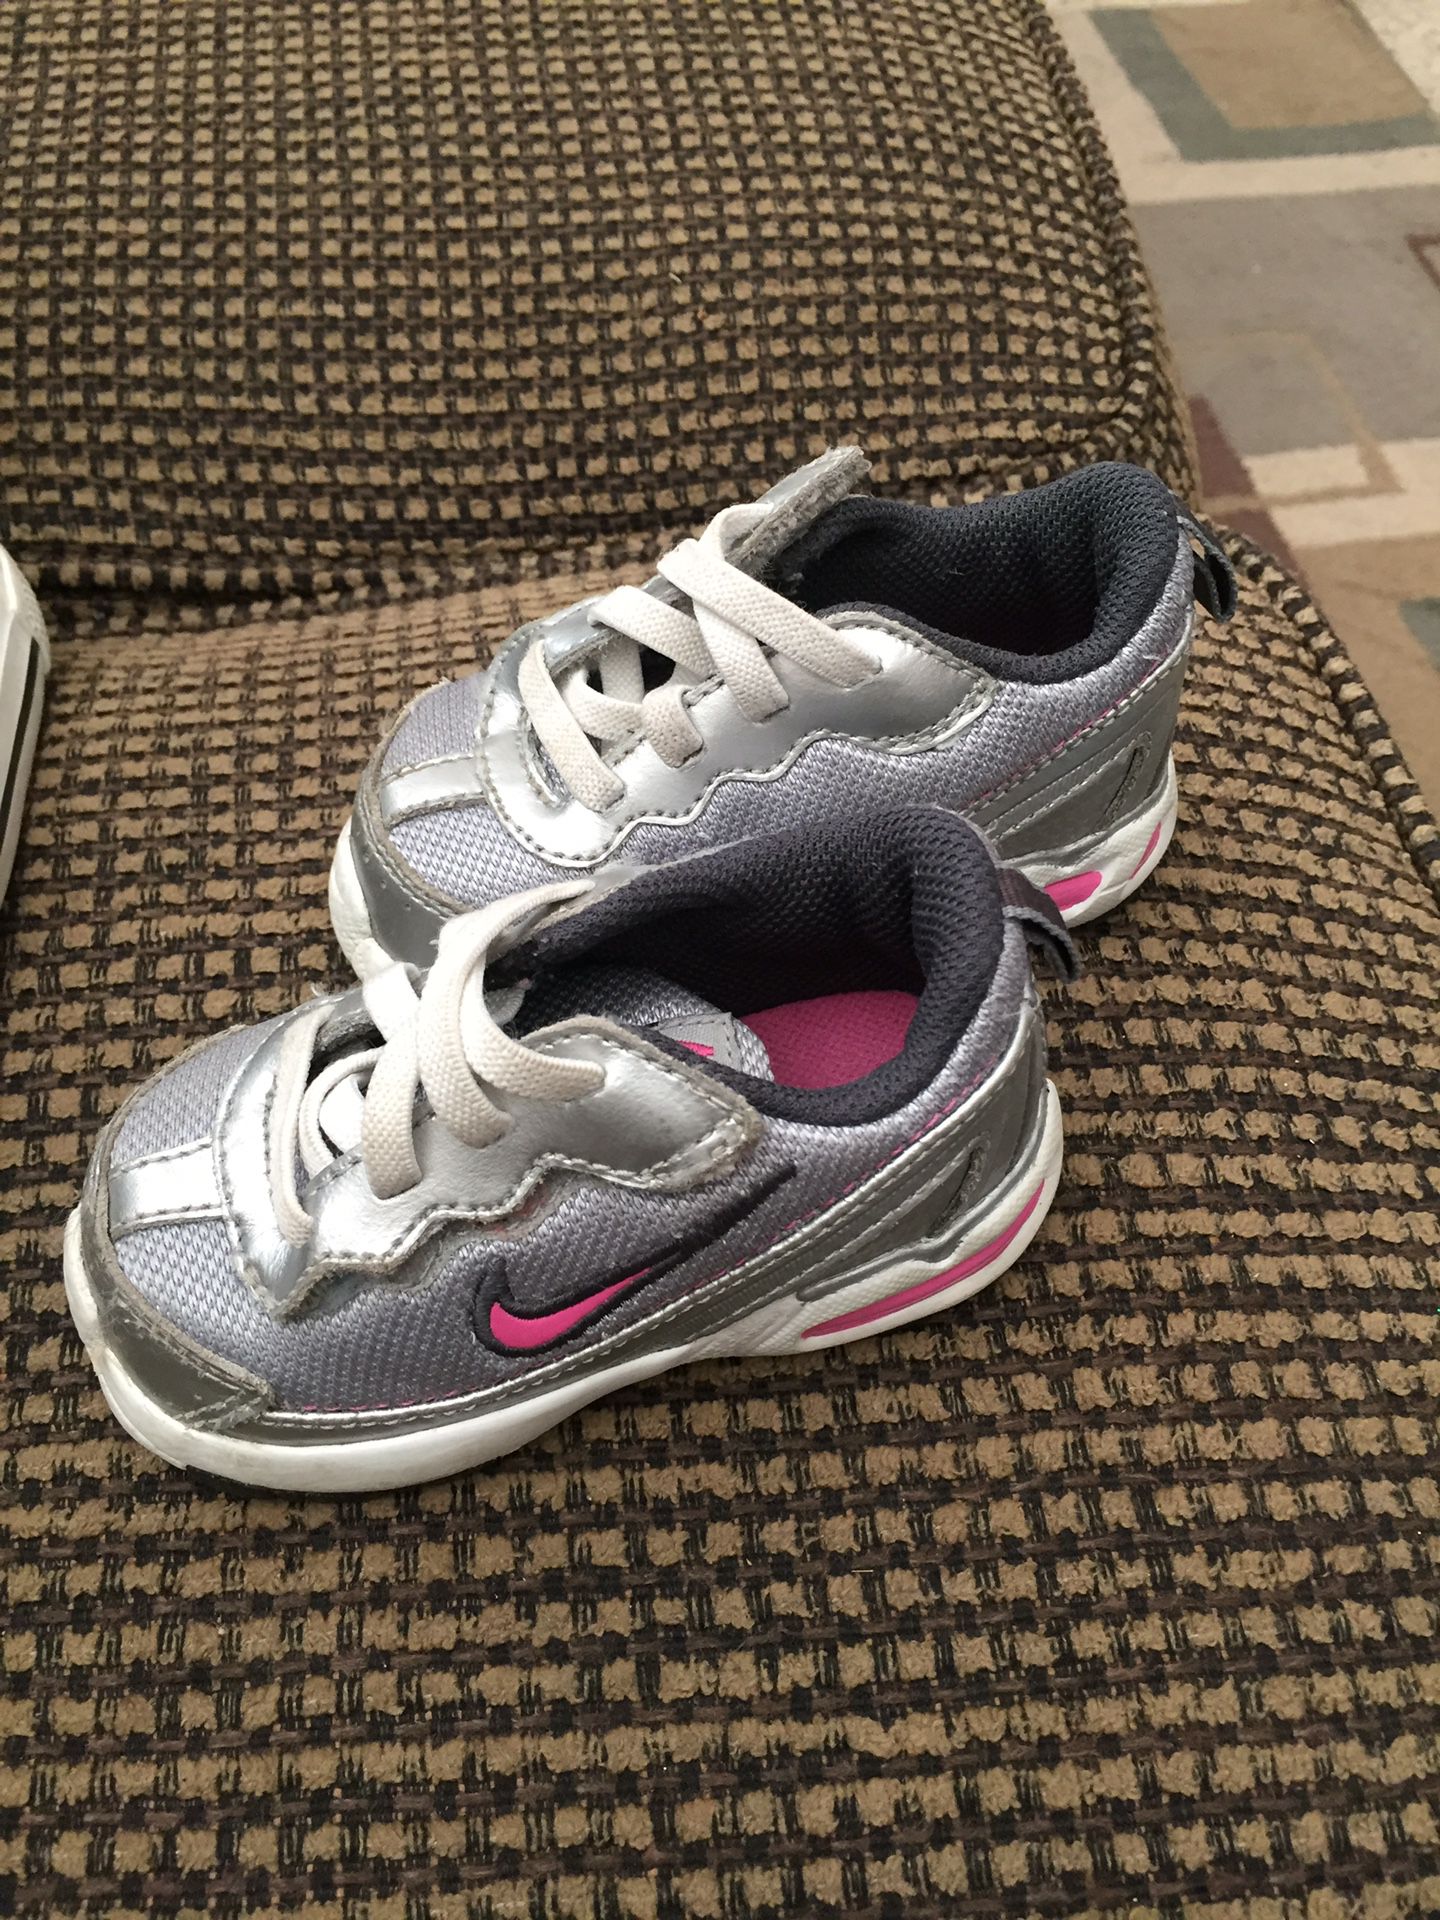 Size 4 grey and pink Nike shoes